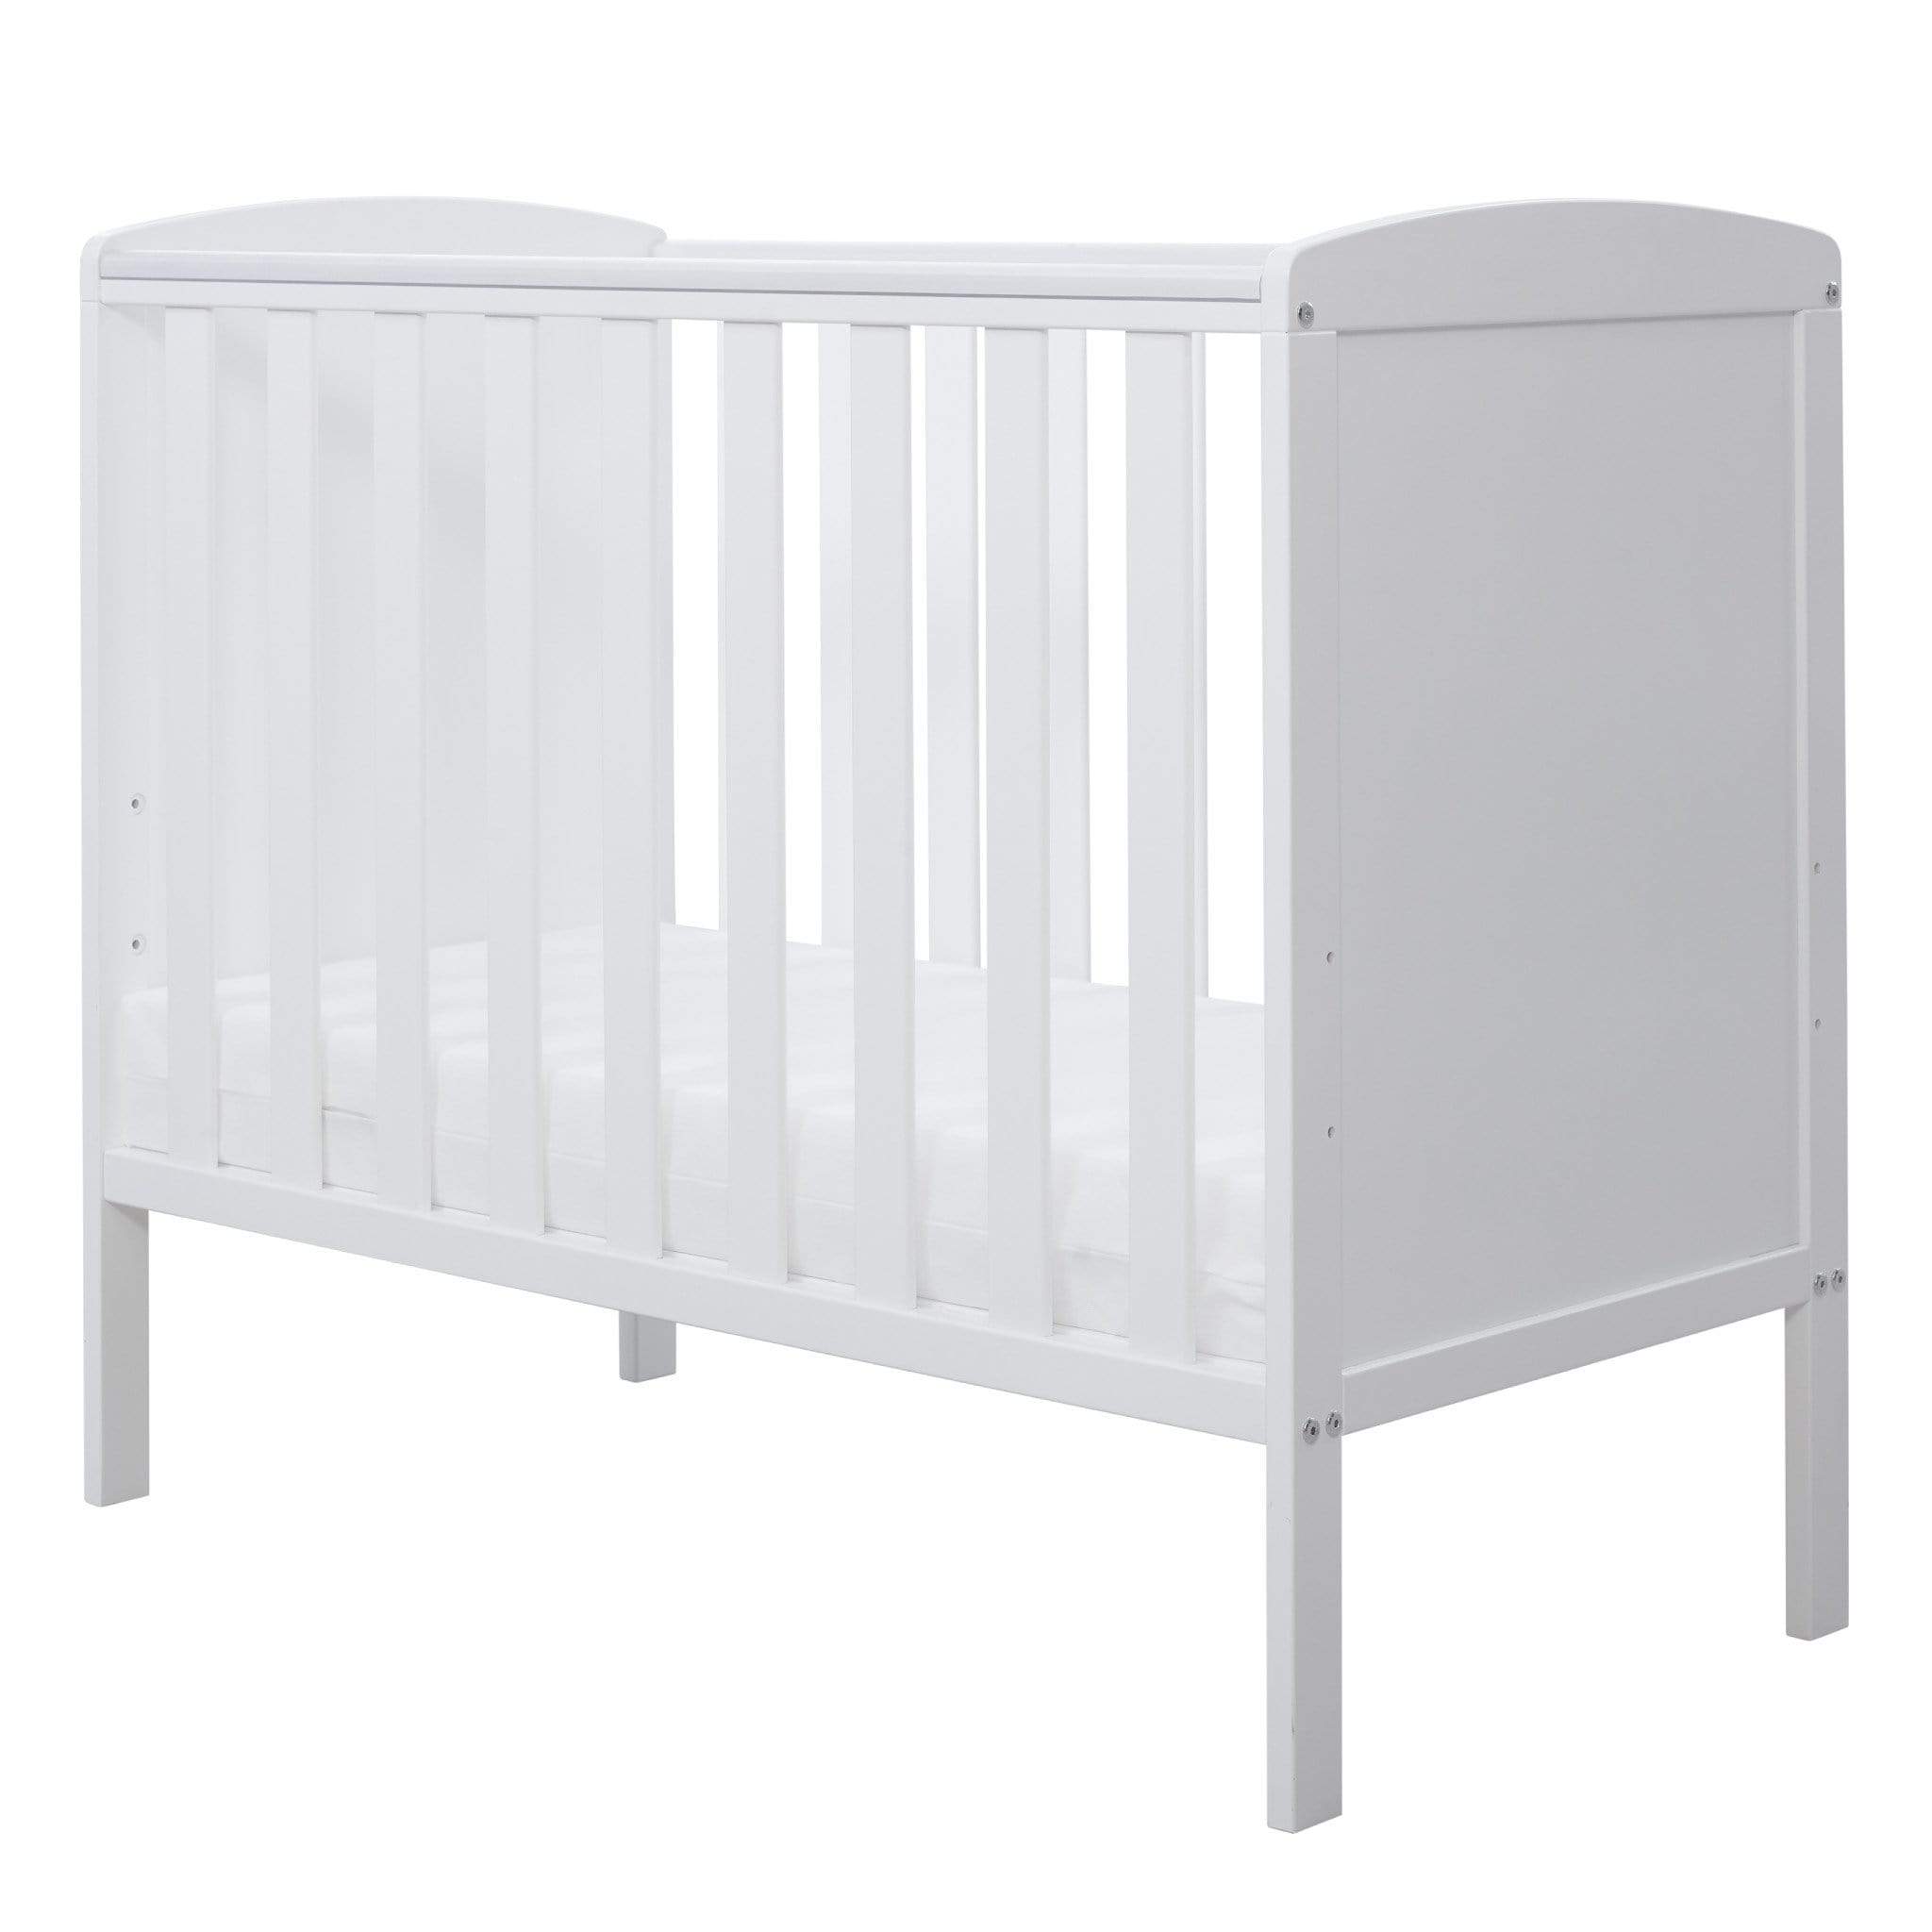 Ickle Bubba baby cots Ickle Bubba Coleby Space Saver Cot & Fibre Mattress White 41-001-C2B-801